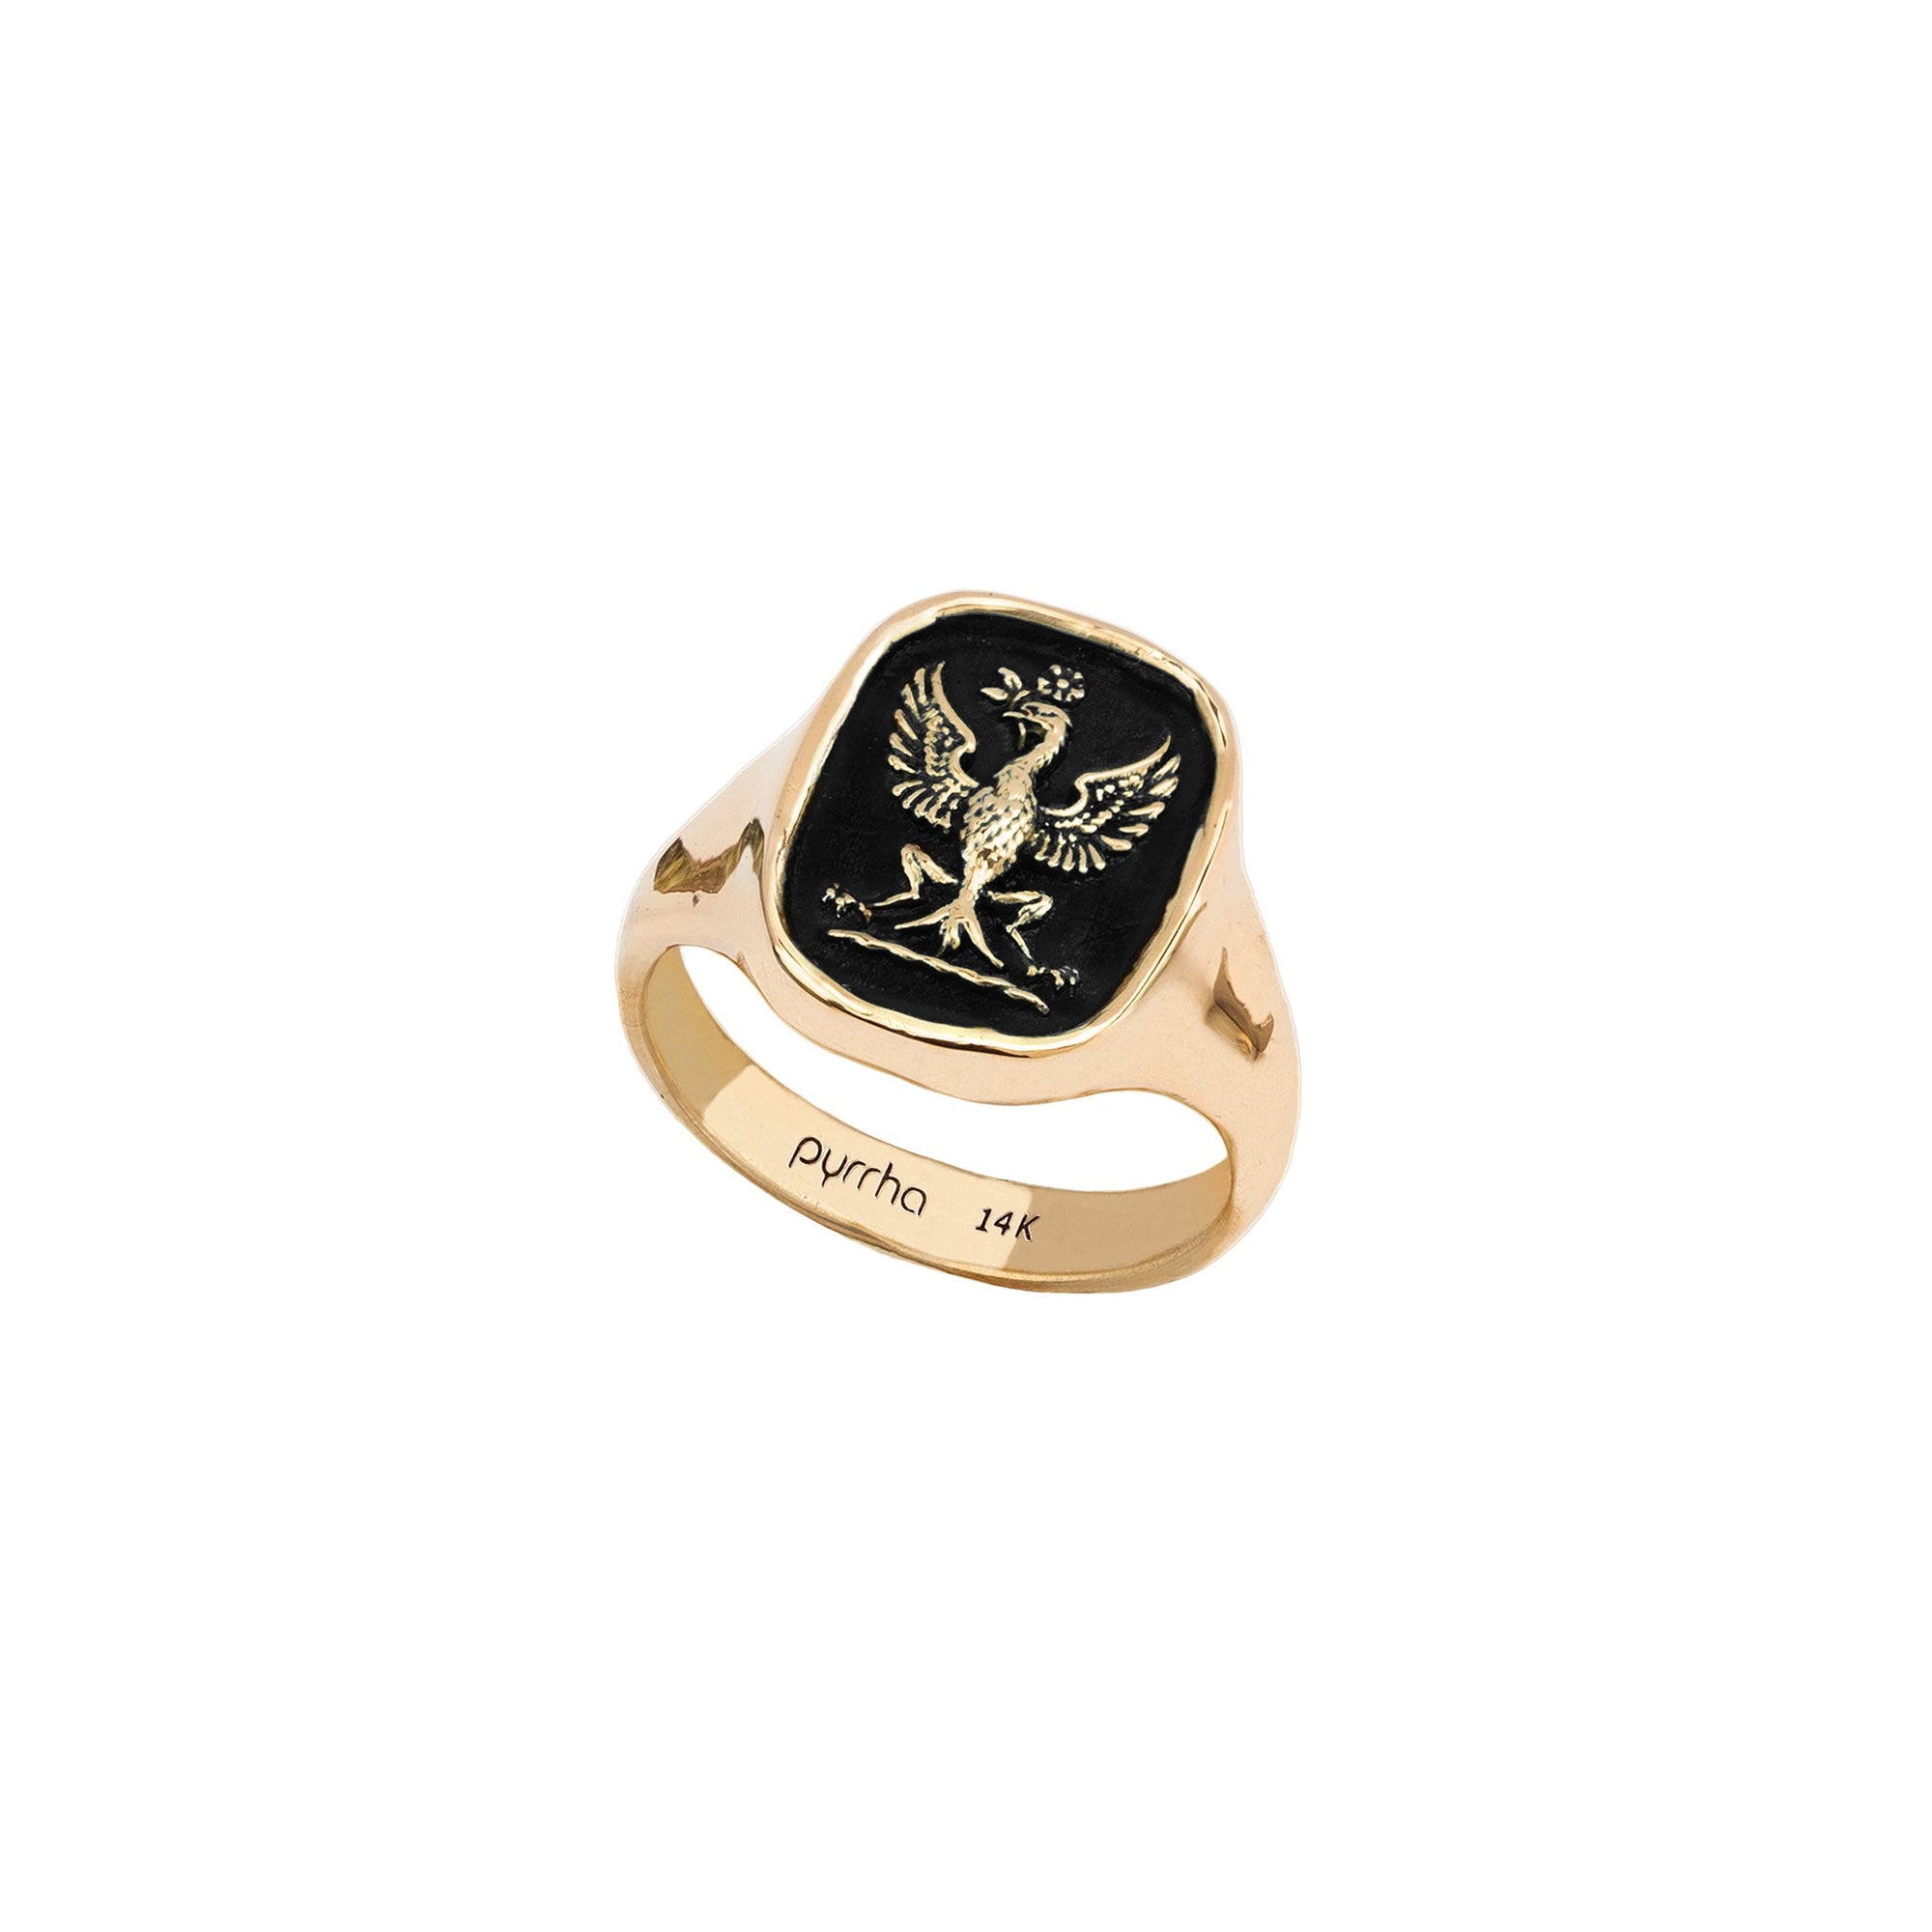 Follow Your Dreams 14K Gold Signet Ring